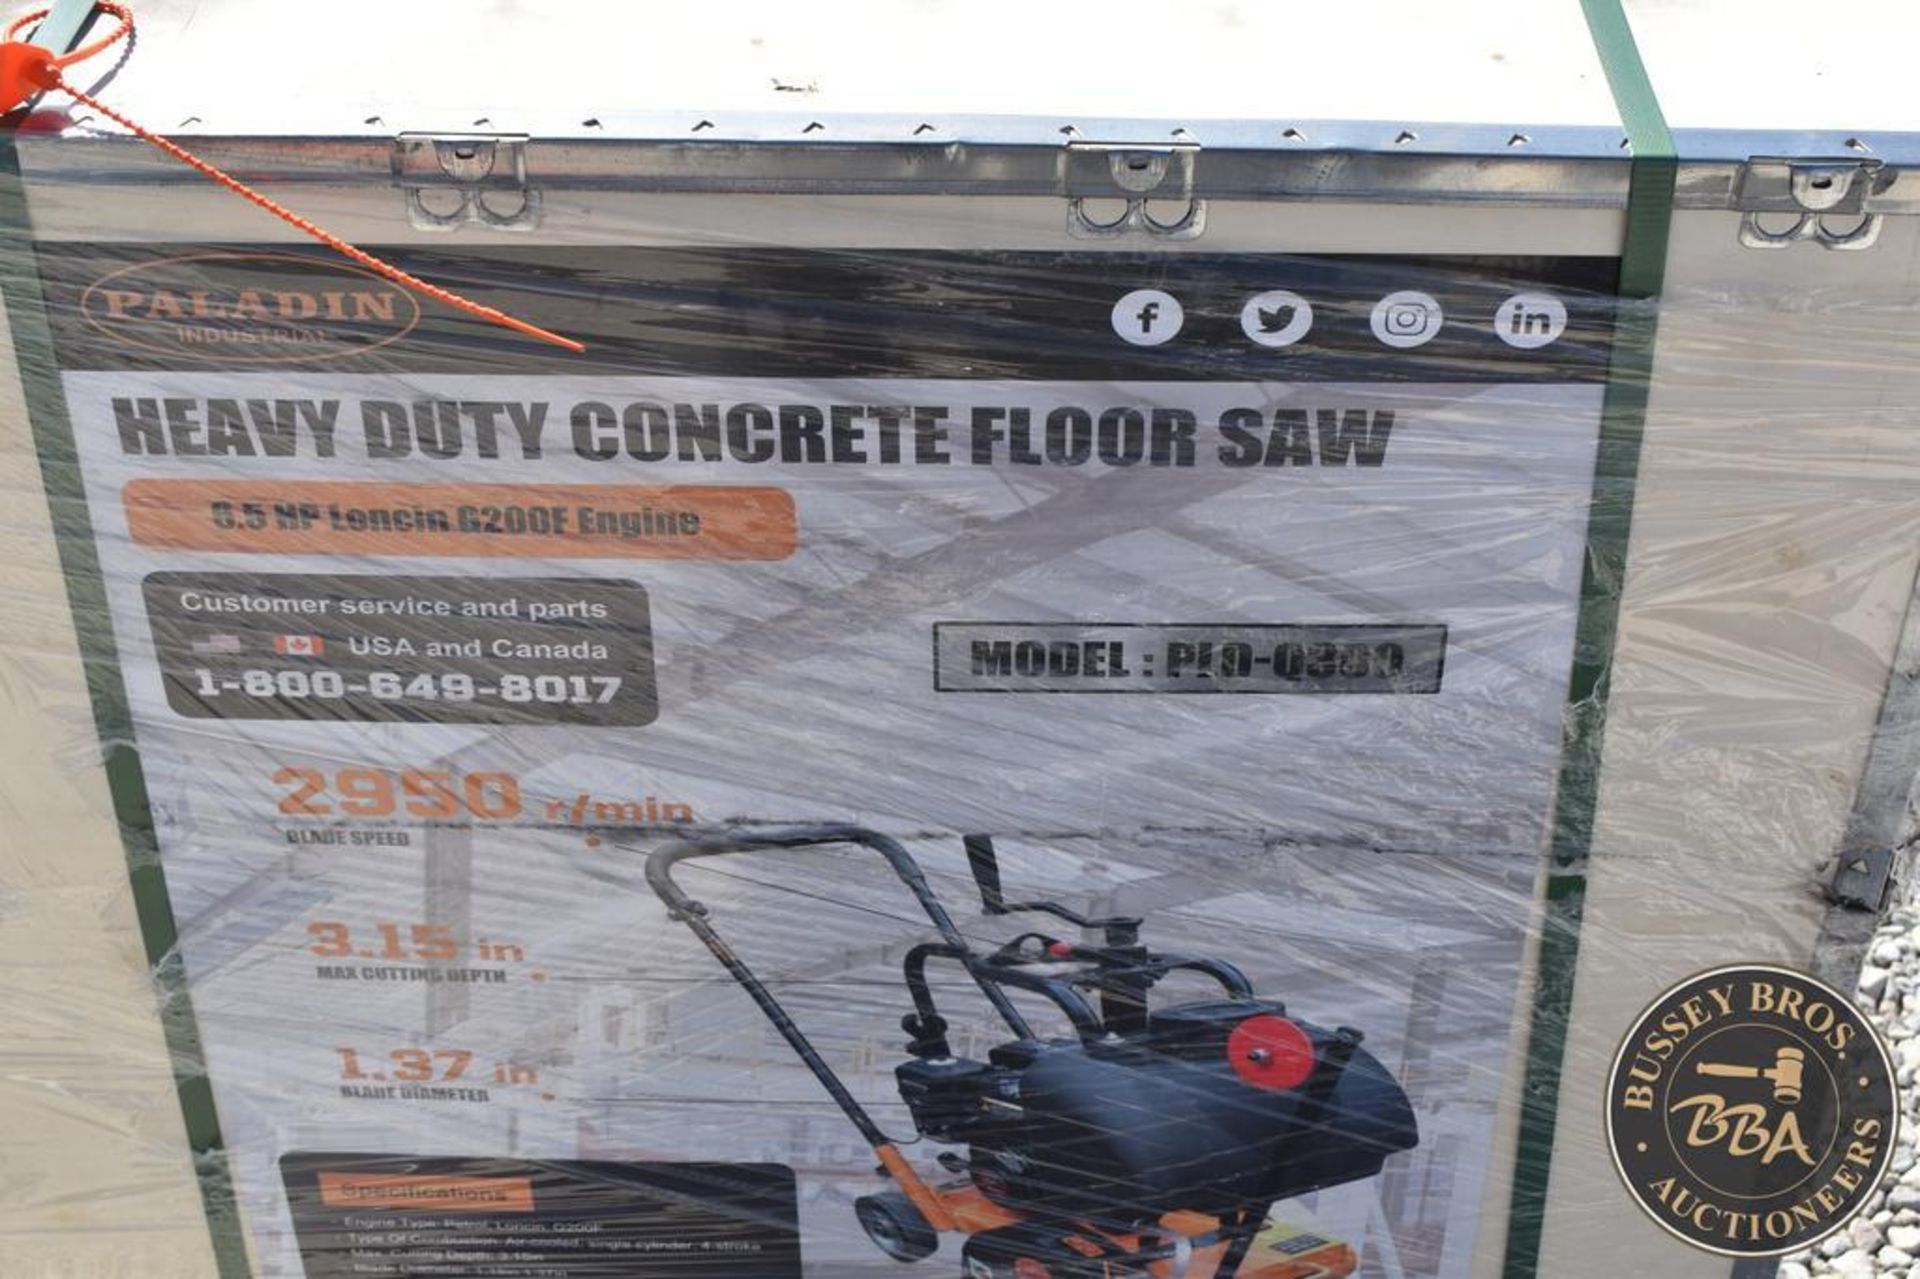 PALADIN INDUSTRIAL CONCRETE FLOOR SAW 24968 - Image 3 of 9